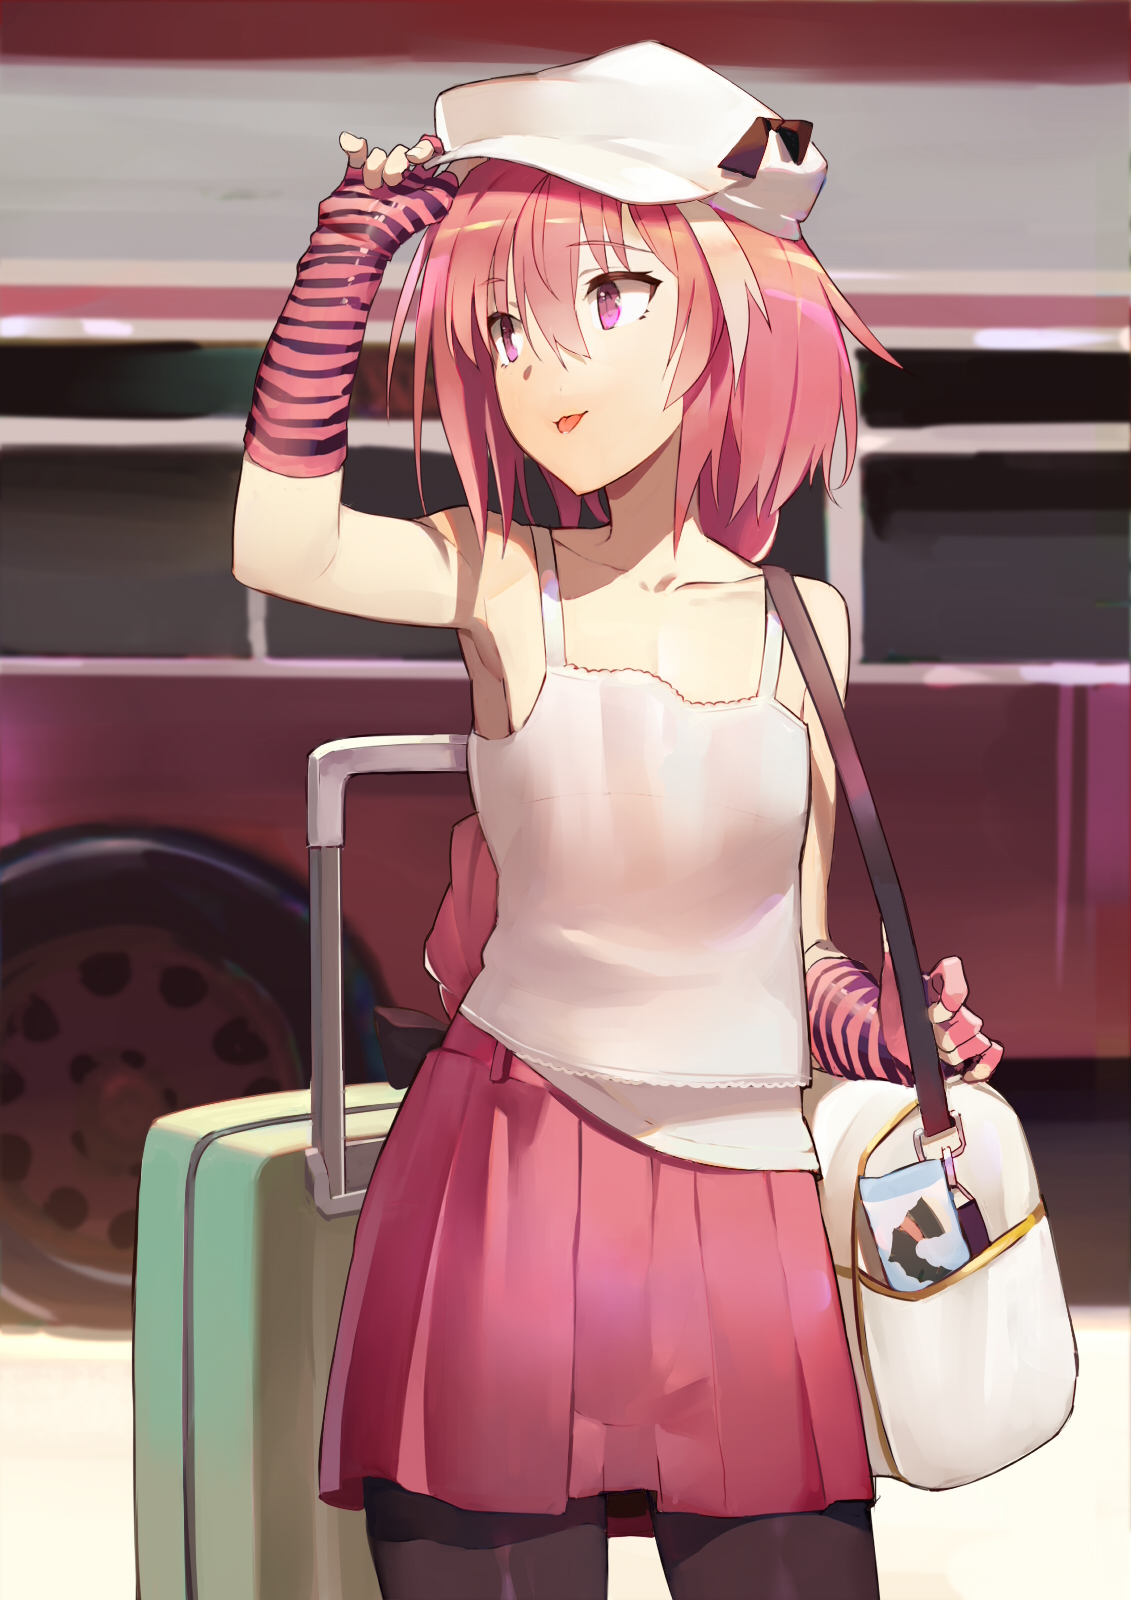 Anime 1131x1600 Fate series Fate/Apocrypha  anime boys Astolfo (Fate/Apocrypha) Fate/Grand Order 2D pantyhose thighs tongue out femboy armpits pink hair long hair pink eyes buses fan art vehicle anime Pixiv anime girls skirt hat